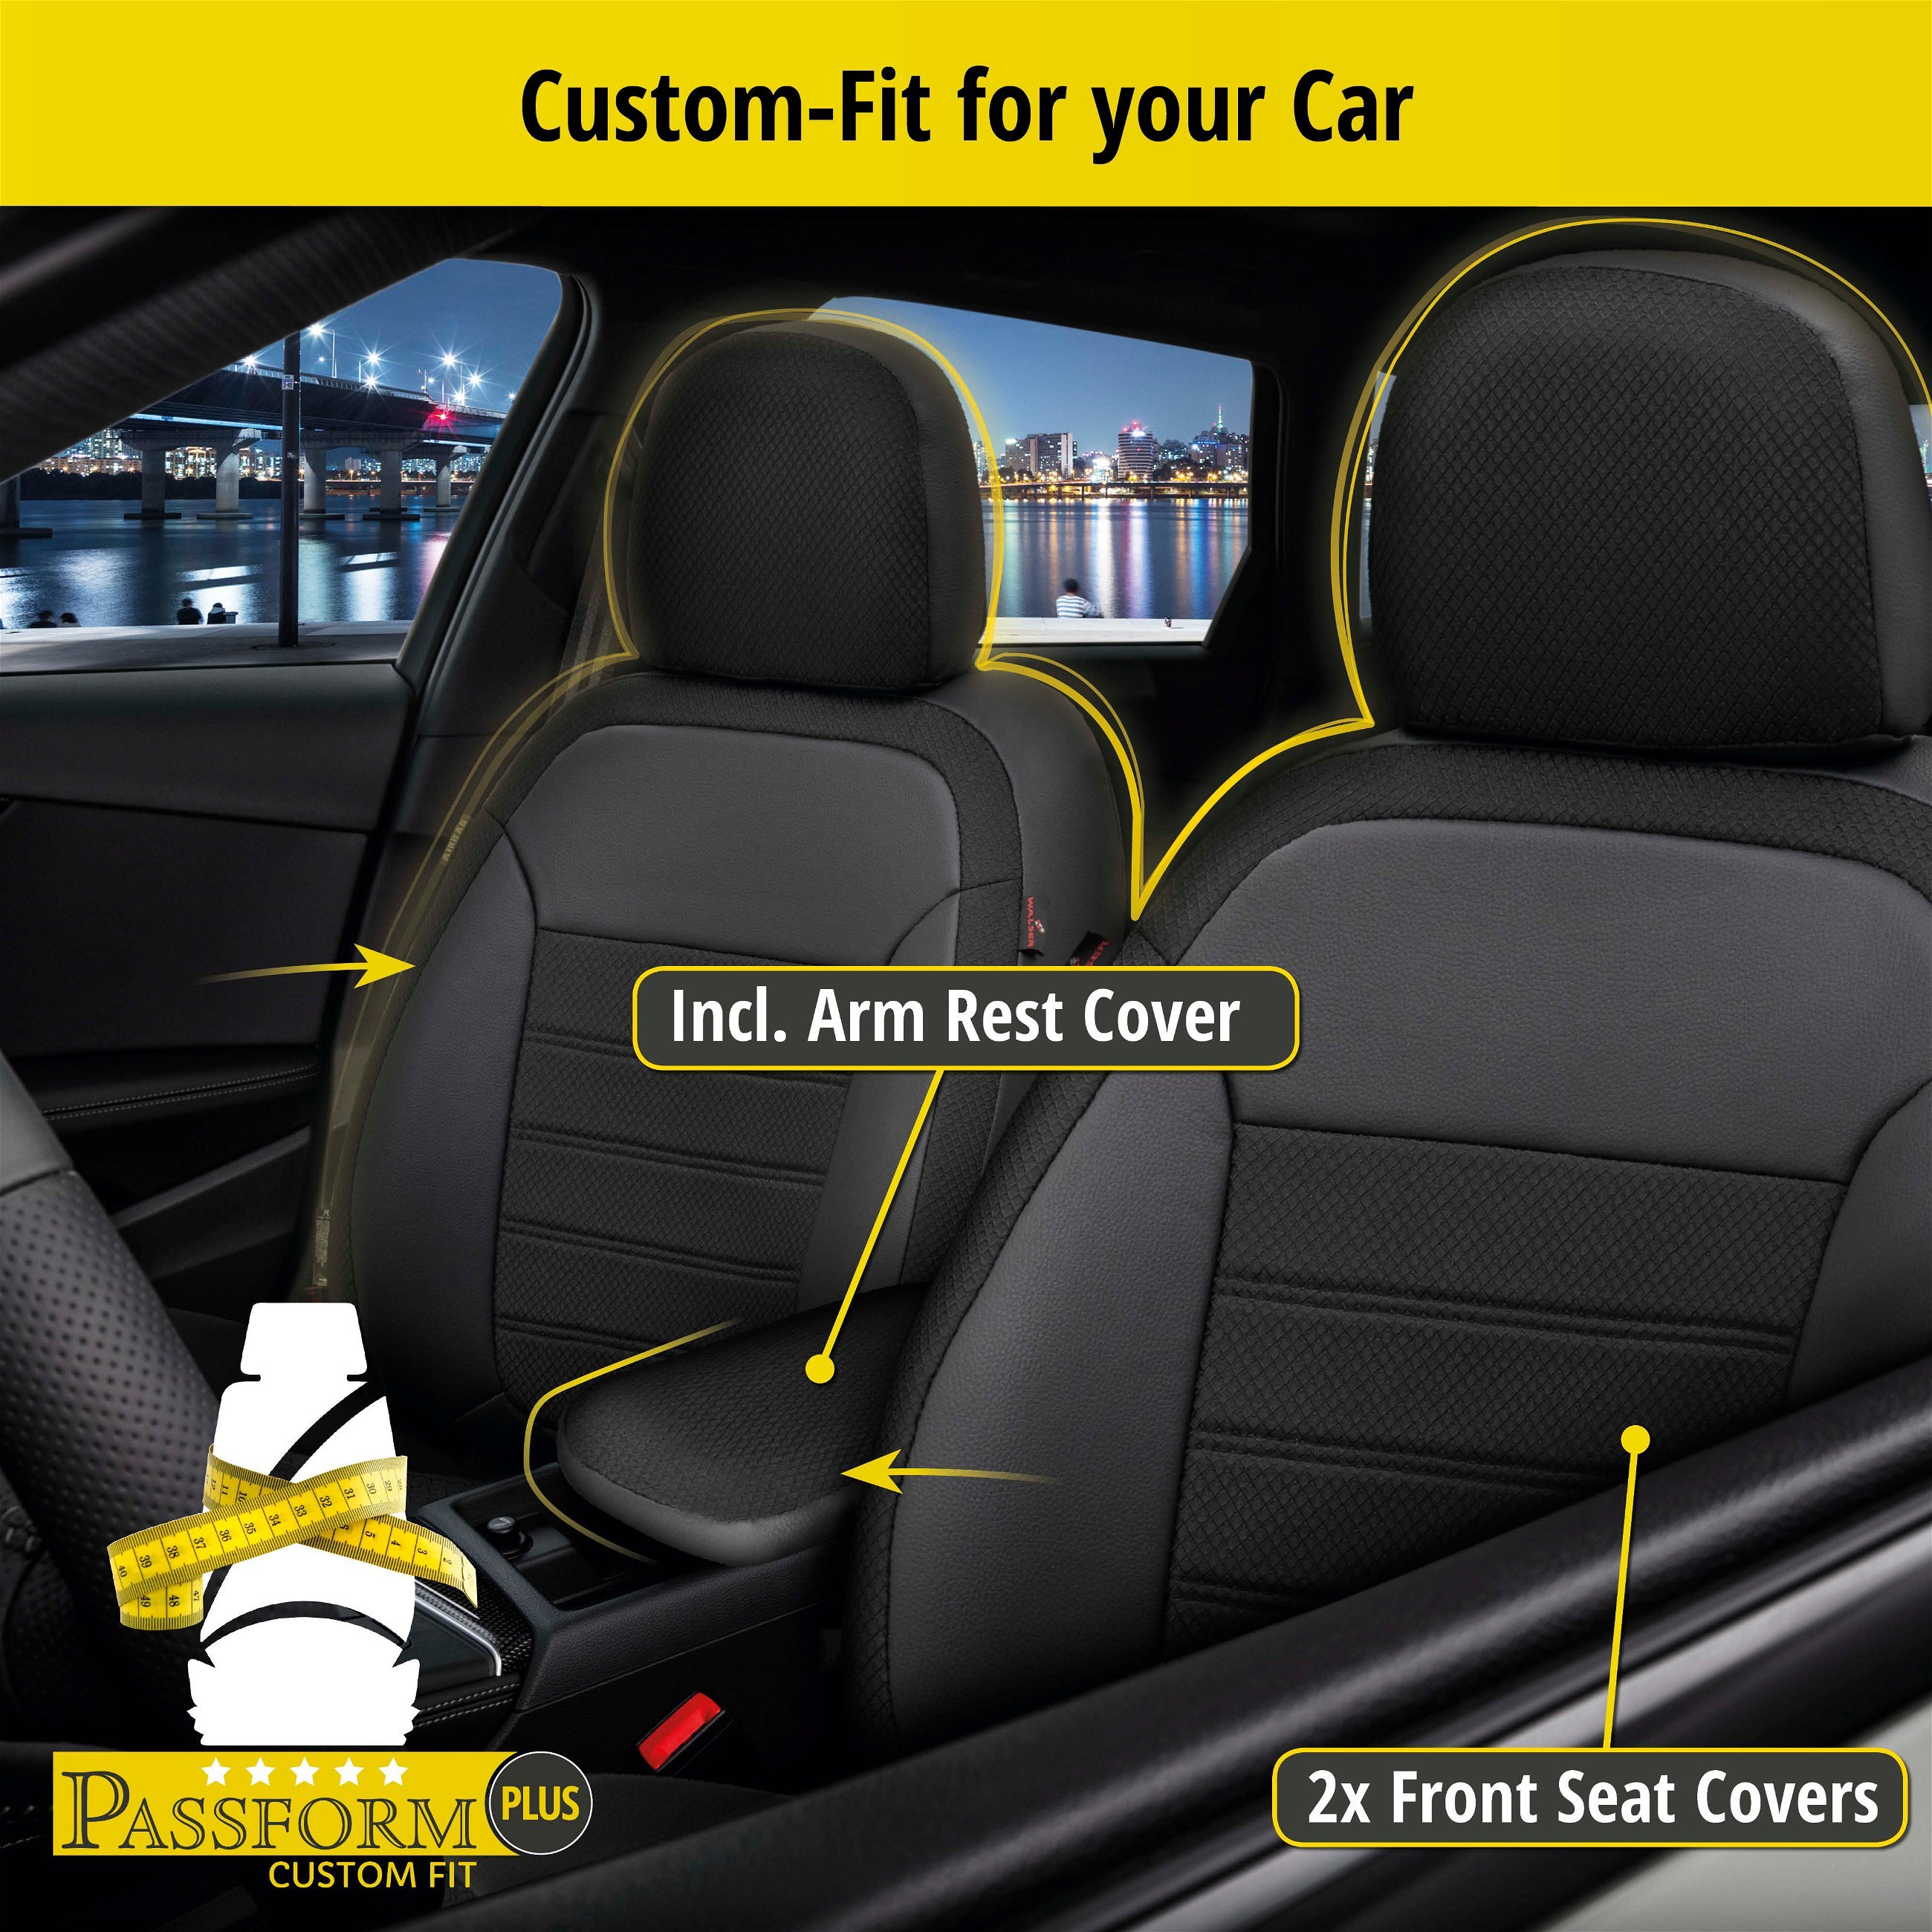 Seat Cover Aversa for Ford Focus 2012-Today, 2 seat covers for normal seats